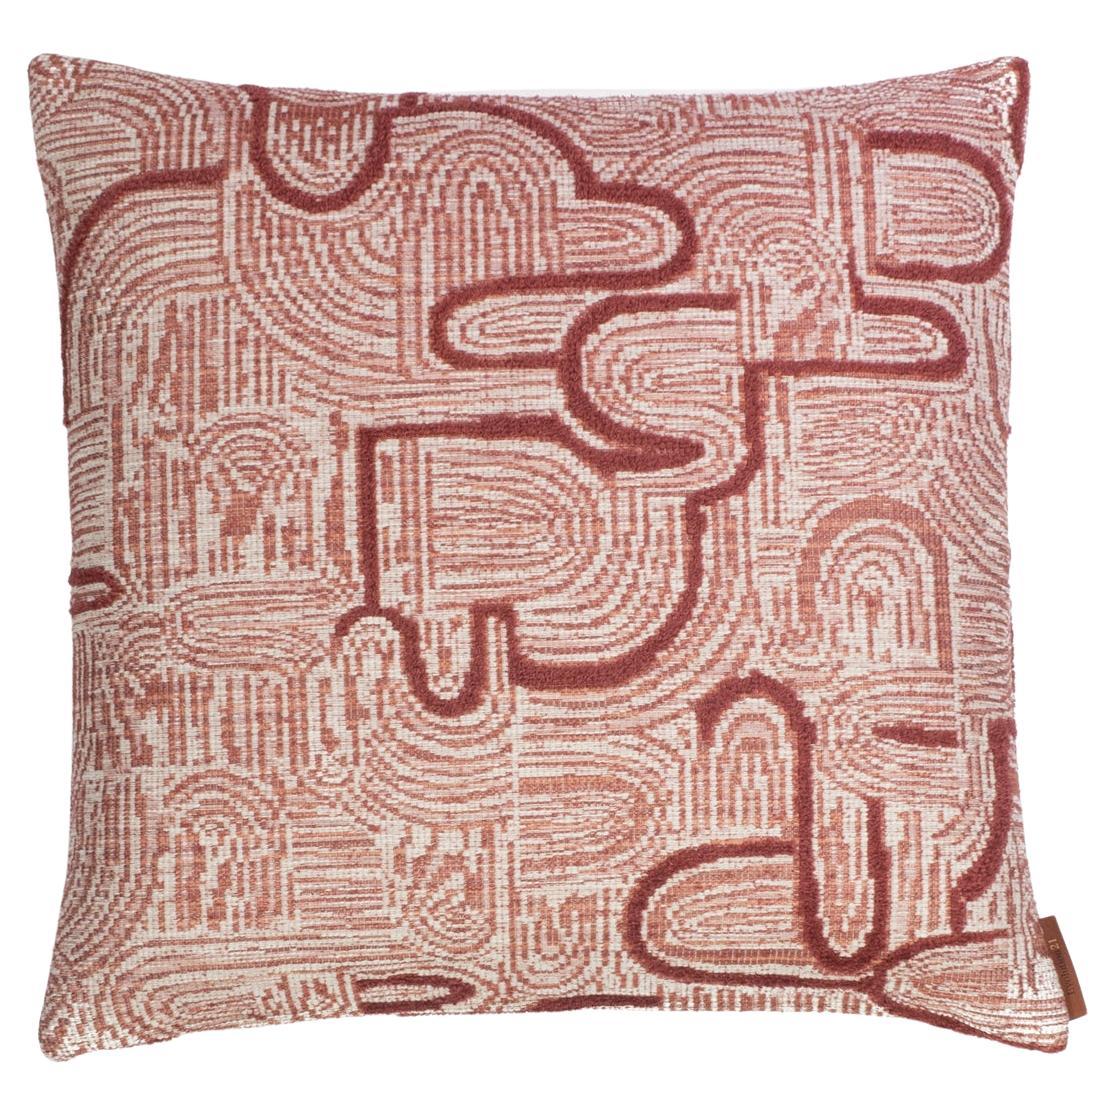 Modern Throw Patterned Pillow Amsterdam Rose by Evolution21